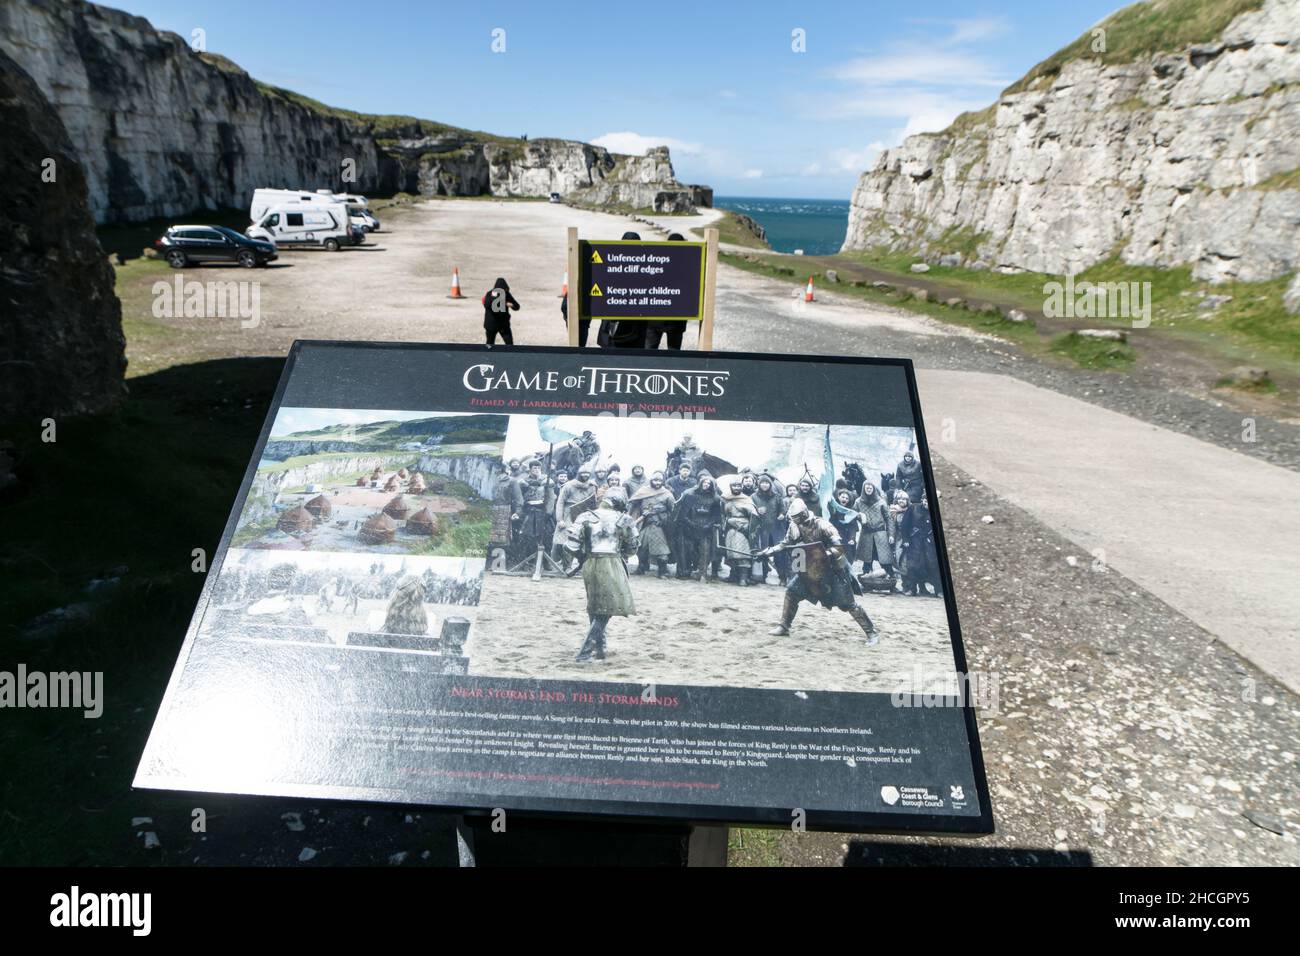 Descriptive board of filming set details and photos and tourists walking on the backround. Game of thrones filming sites Ballintoy. Northern Ireland.U Stock Photo